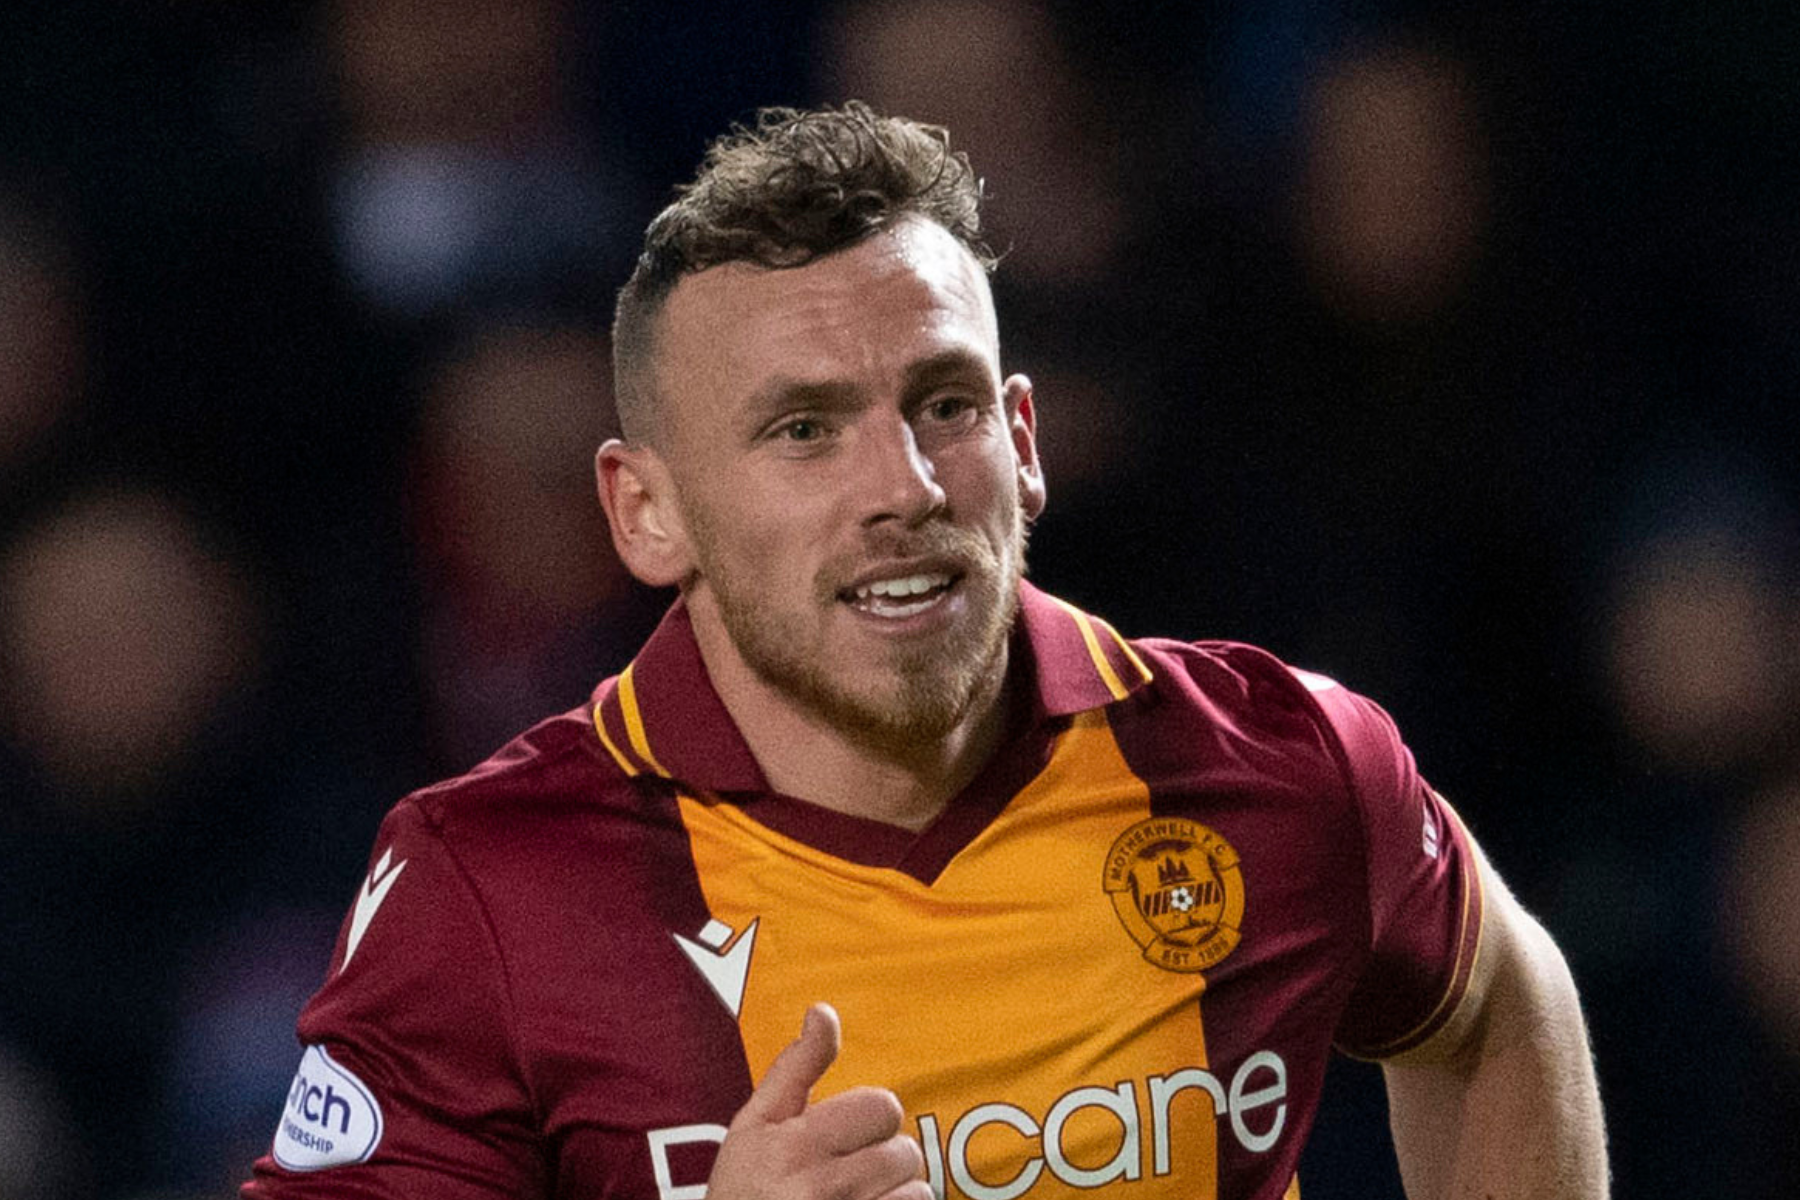 Motherwell winger Connor Shields joins Queen's Park on loan